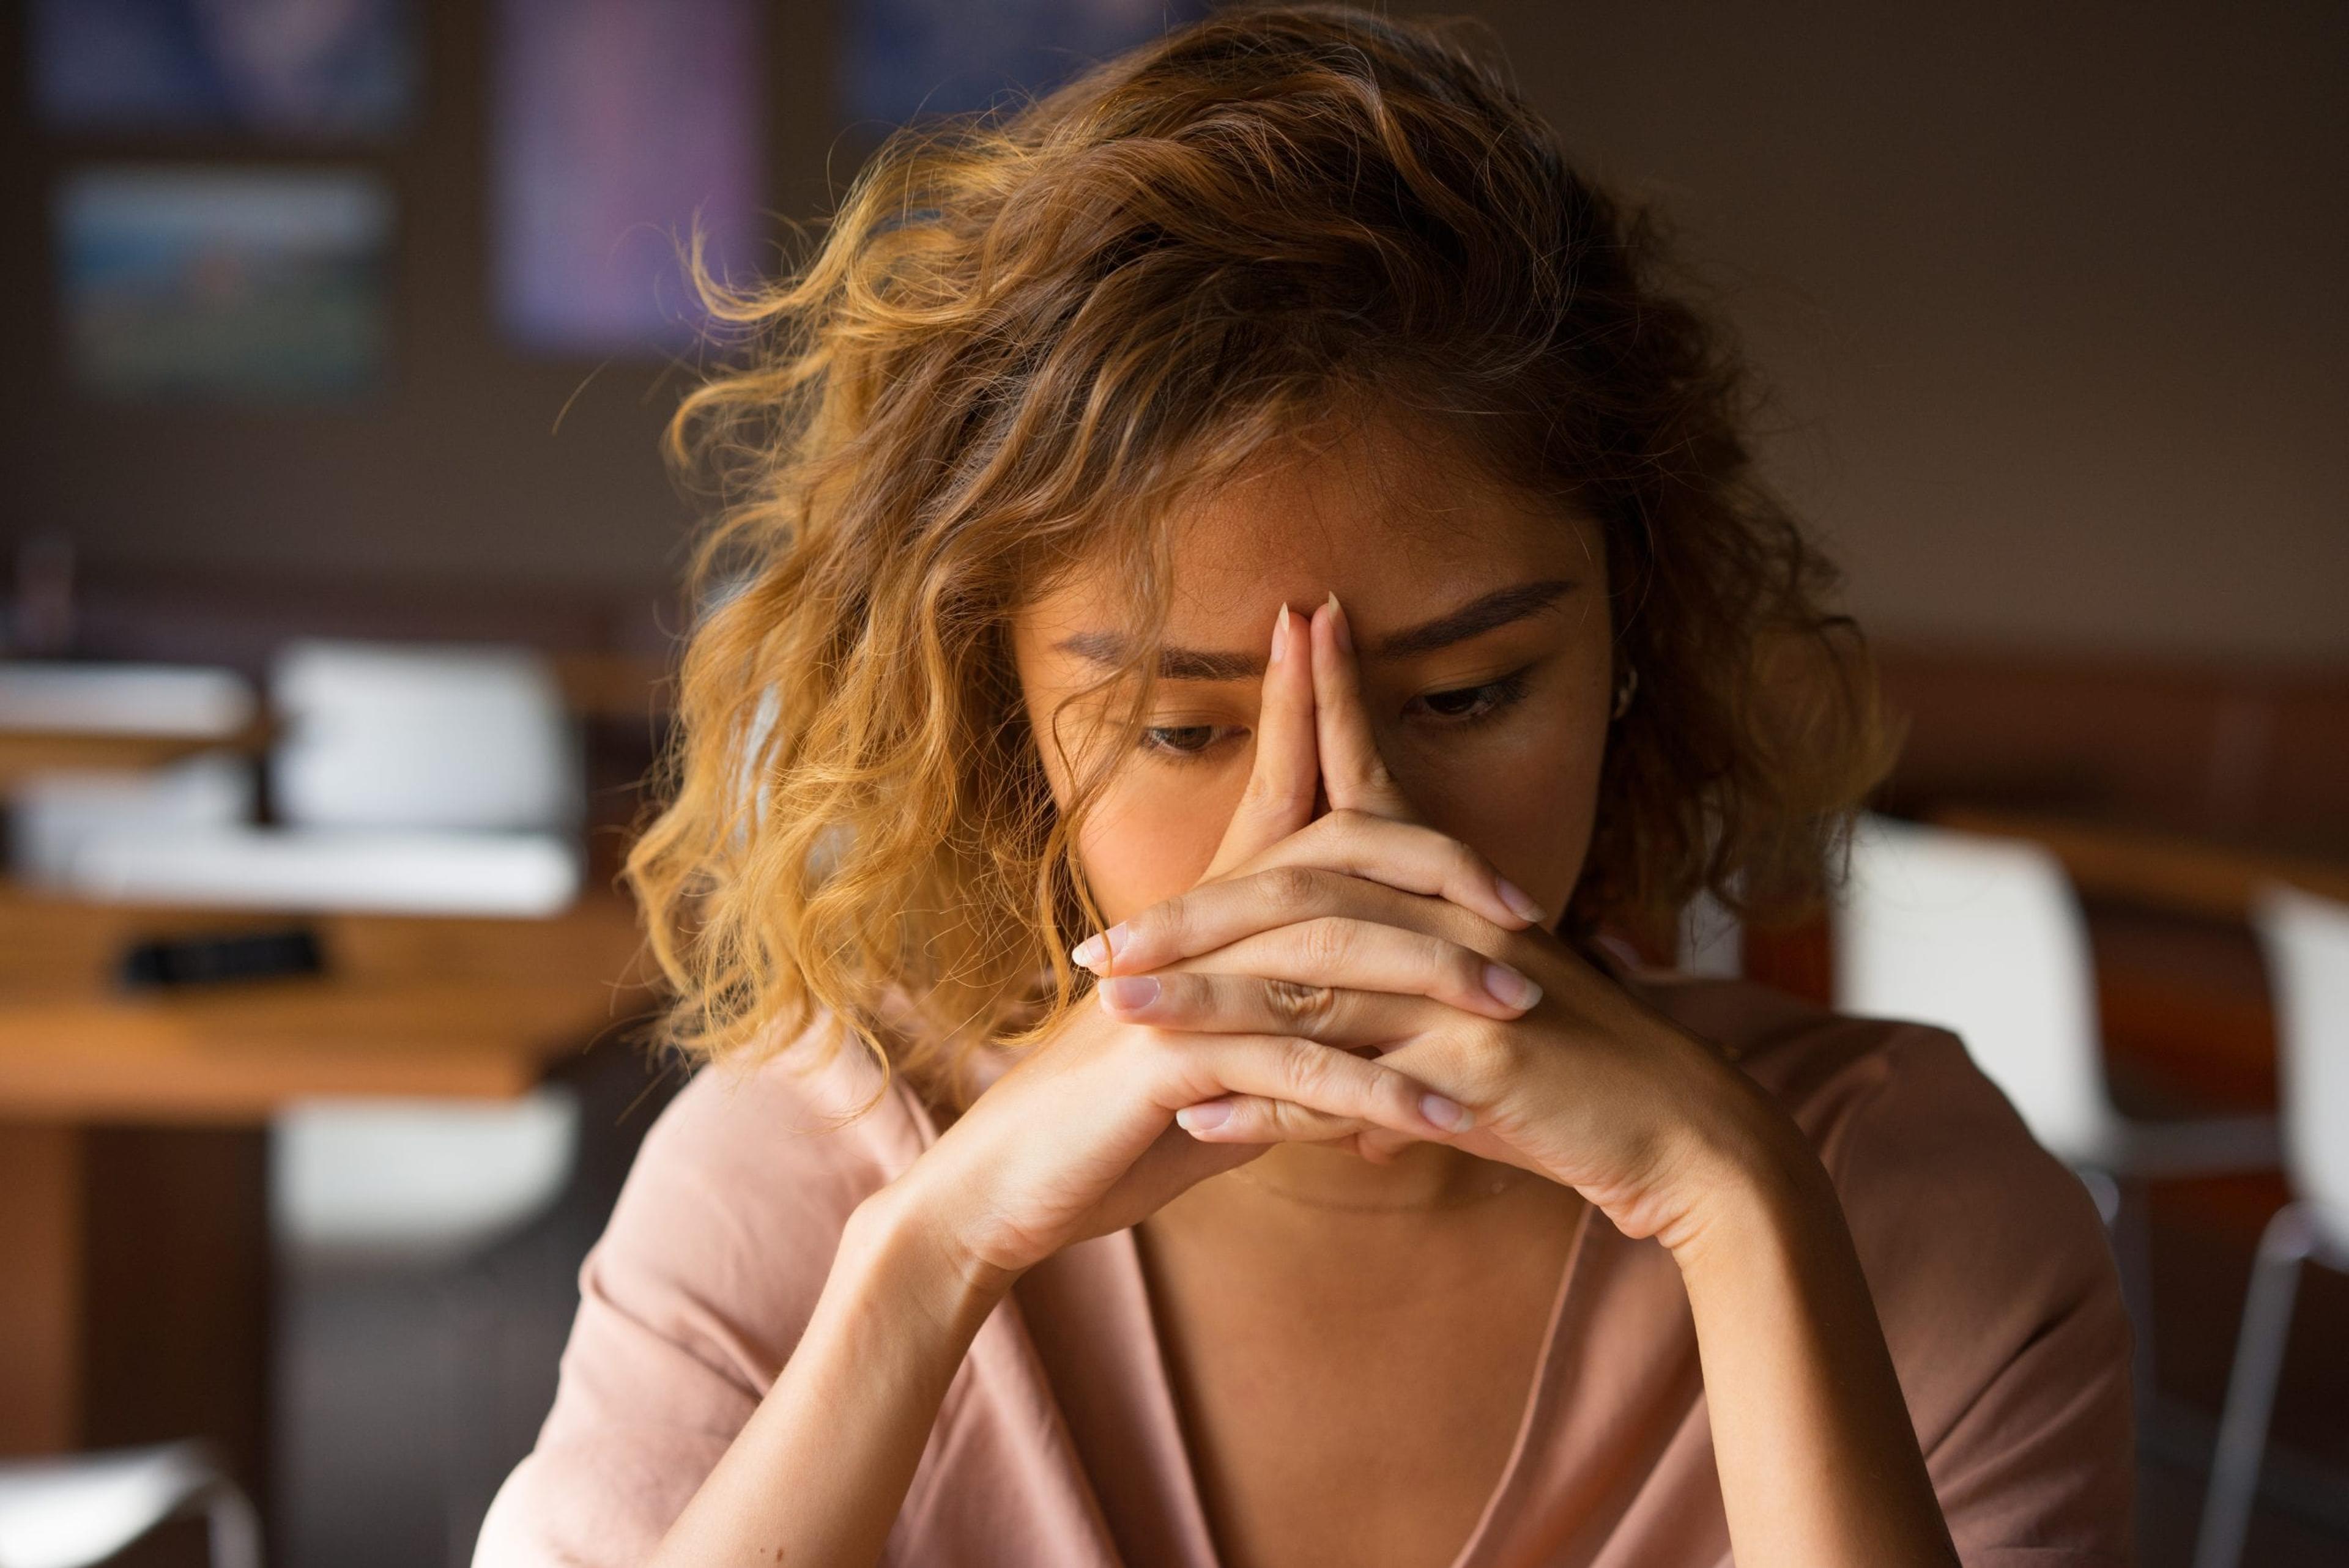 Stressed woman with hands in front of face.